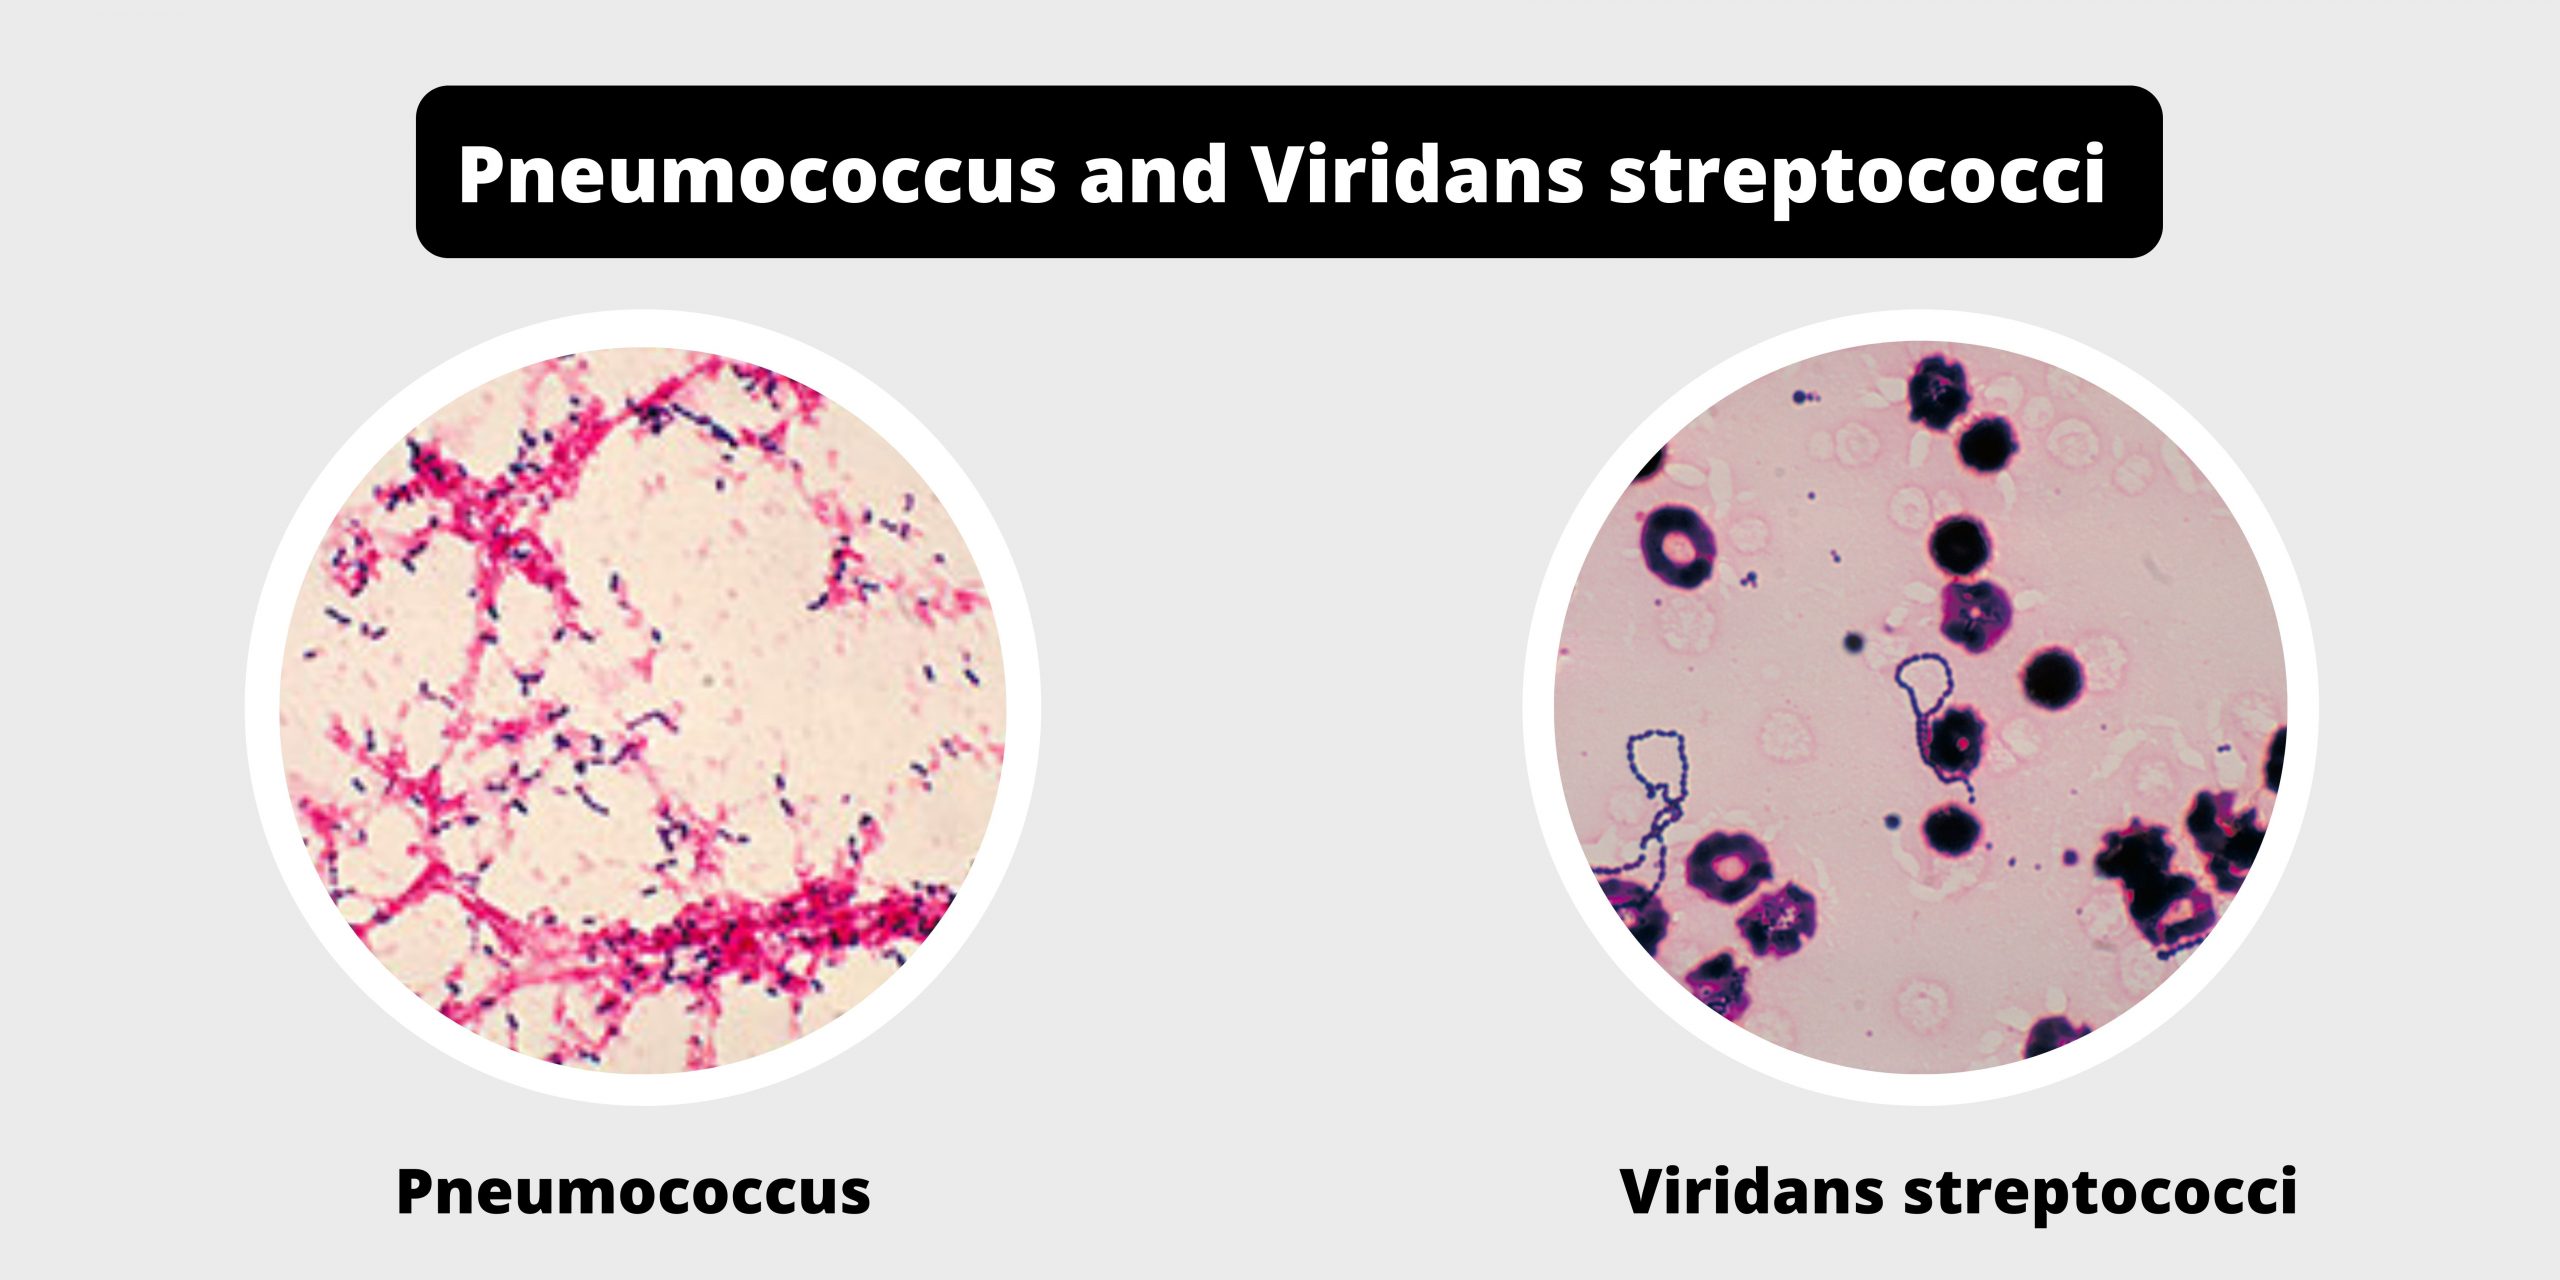 Differences between Pneumococcus and Viridans streptococci